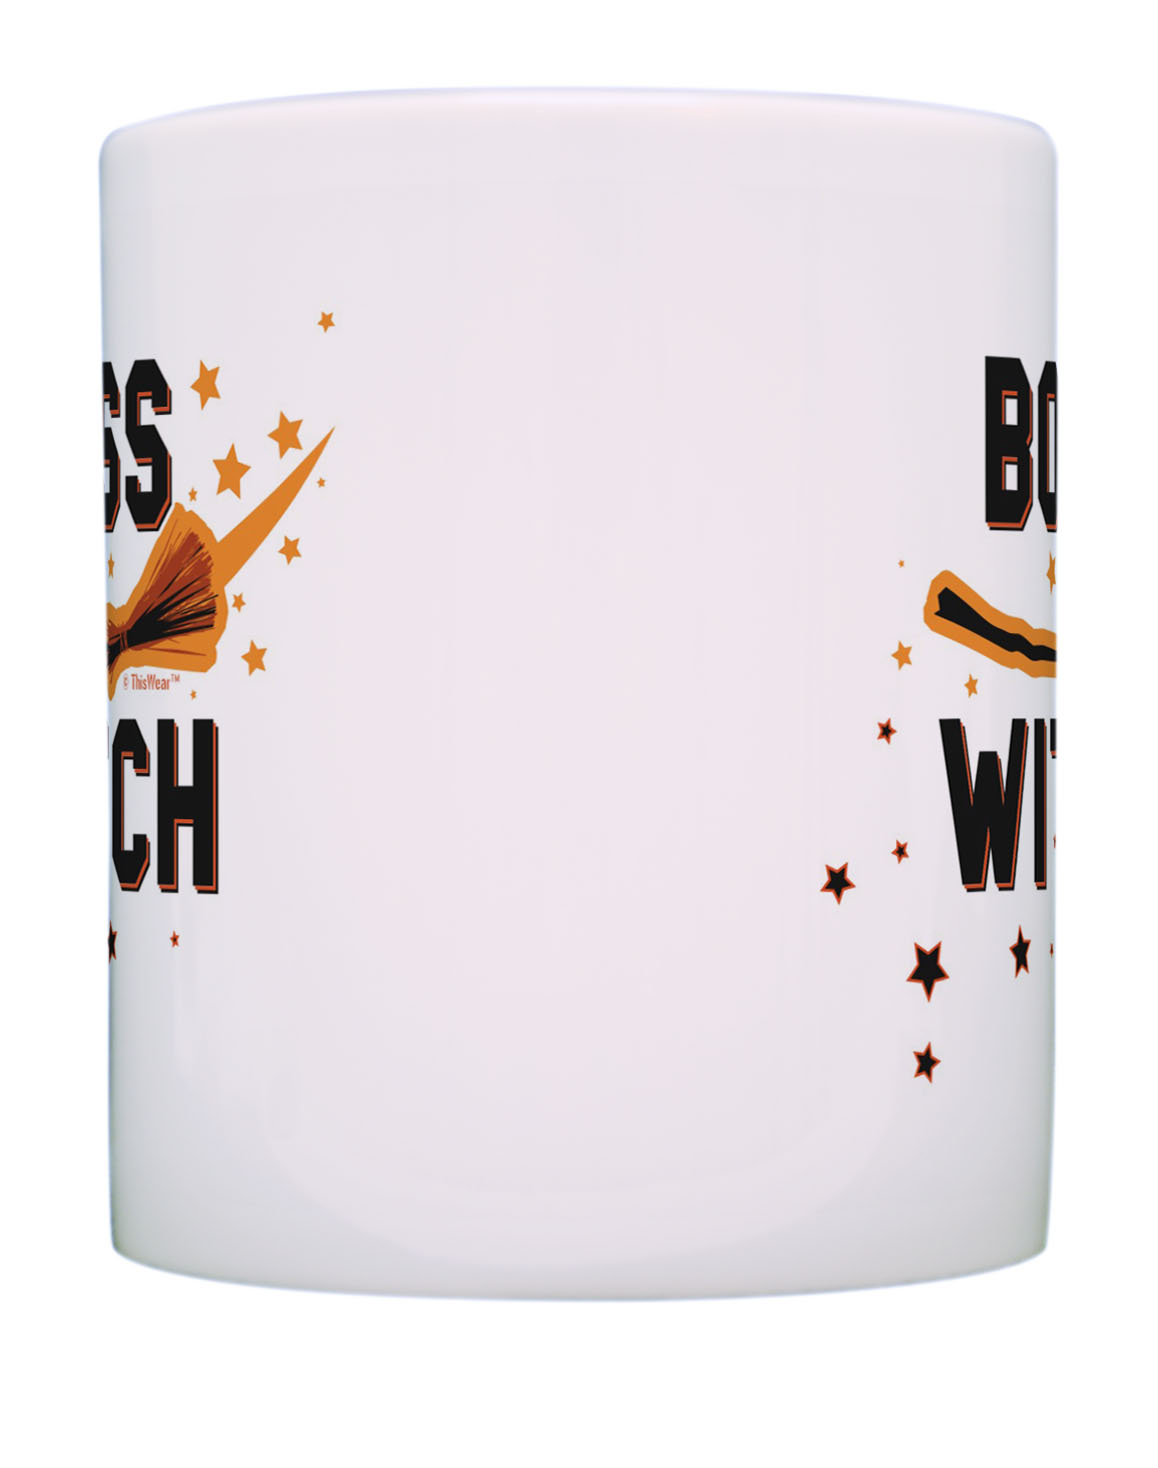 ThisWear Pun Gifts Boss Witch Halloween Mug Set Broomstick Witch Cup 11 ounce 2 Pack Coffee Mugs - image 3 of 4